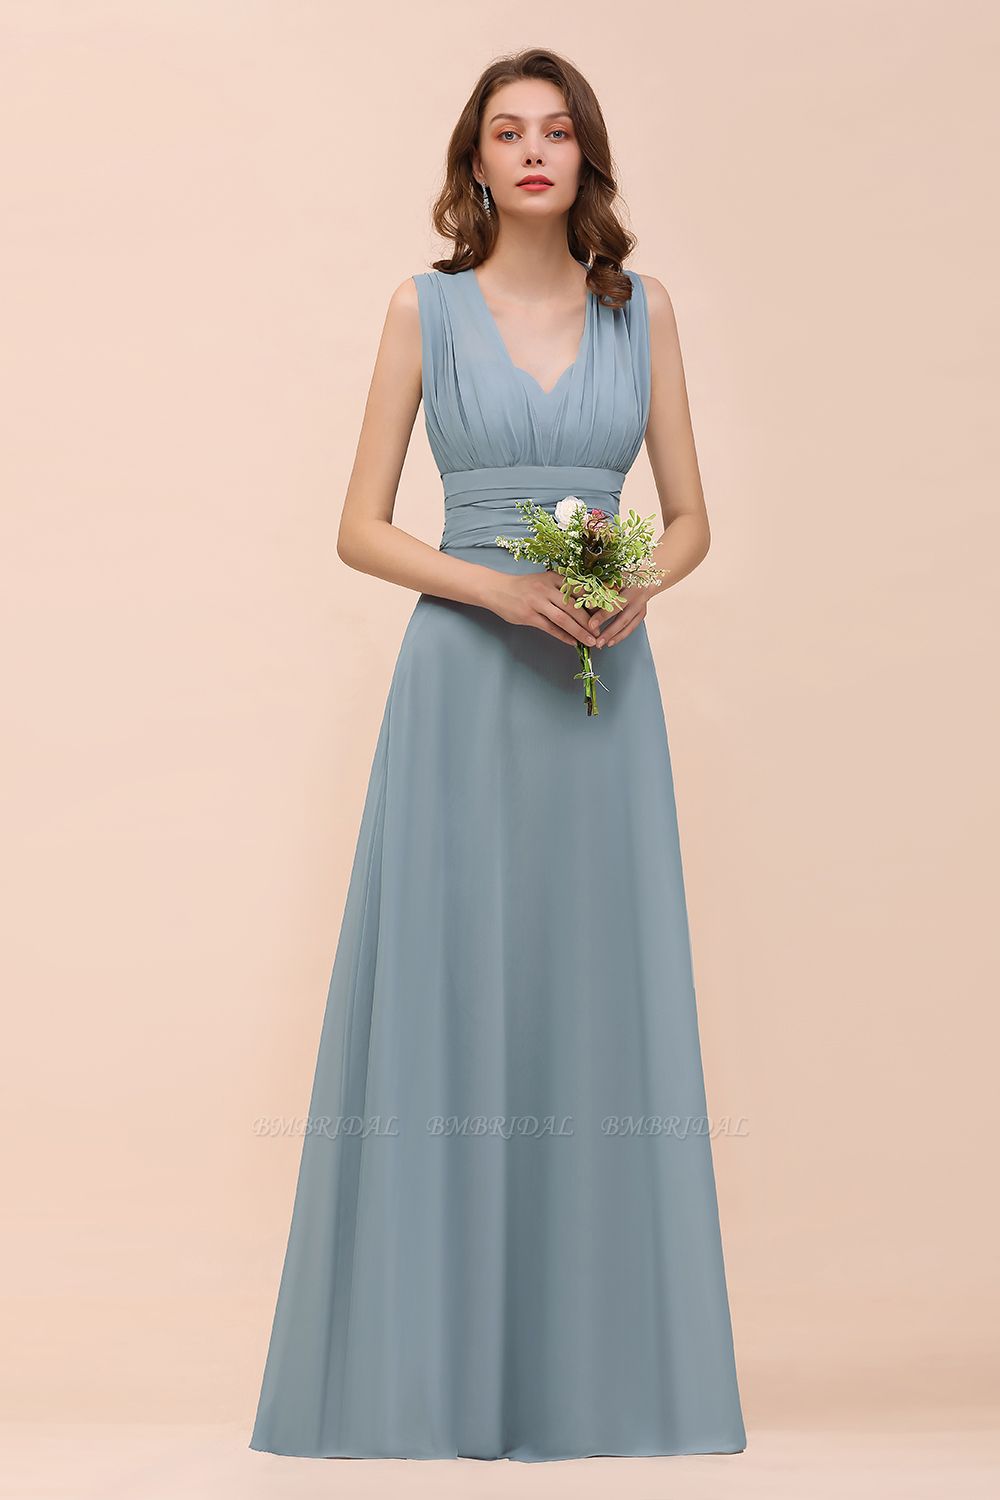 BMbridal New Arrival Dusty Blue Ruched Long Convertible Bridesmaid Dresses